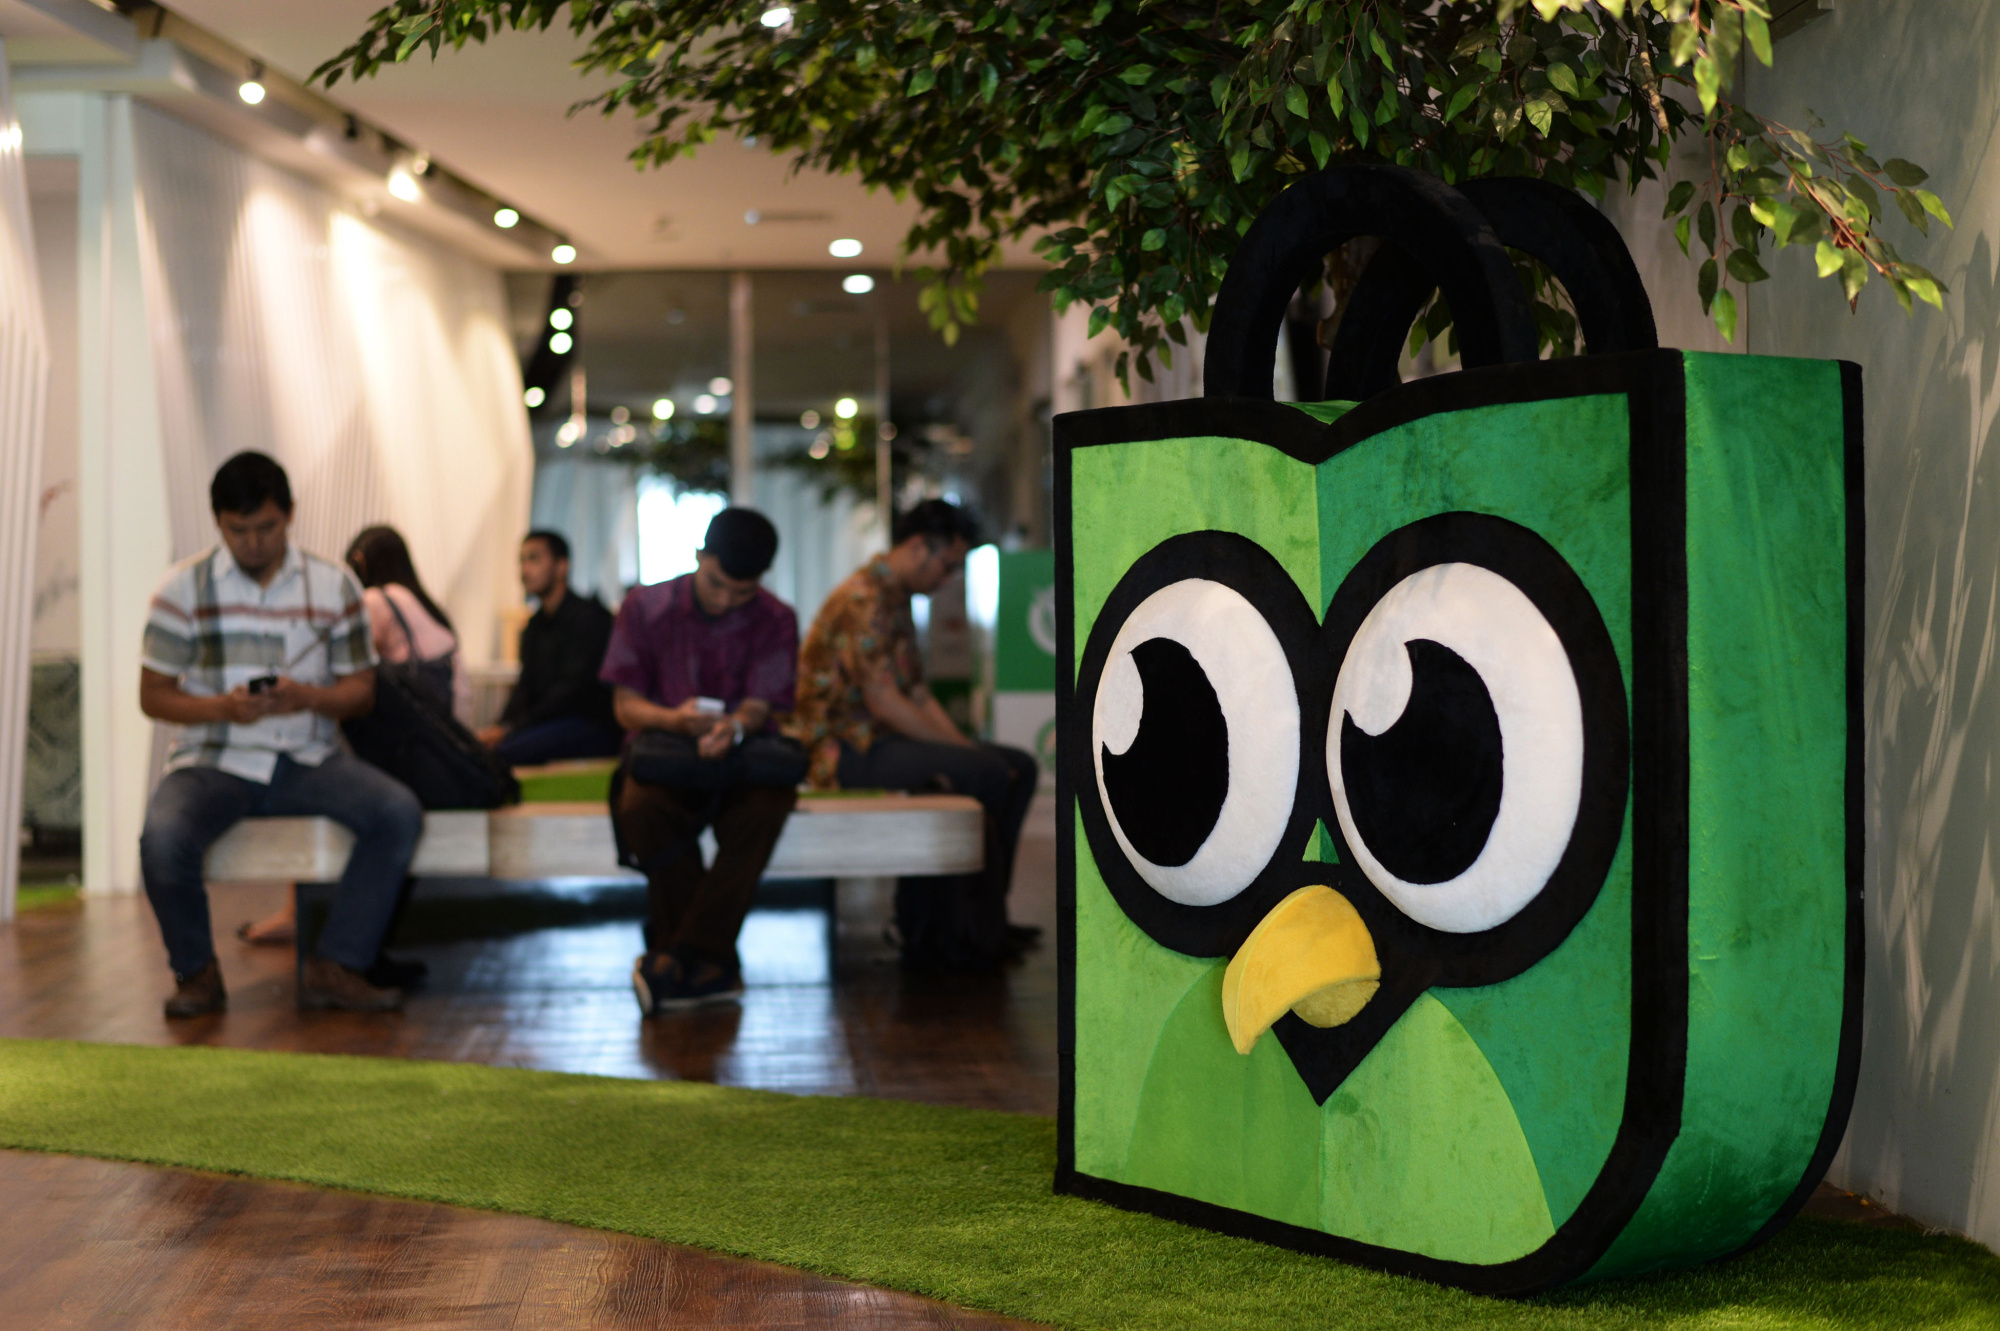 PT Tokopedia's mascot Toped sits on display in the reception area at the company's offices in Jakarta, Indonesia, on Friday, Feb. 19, 2016.